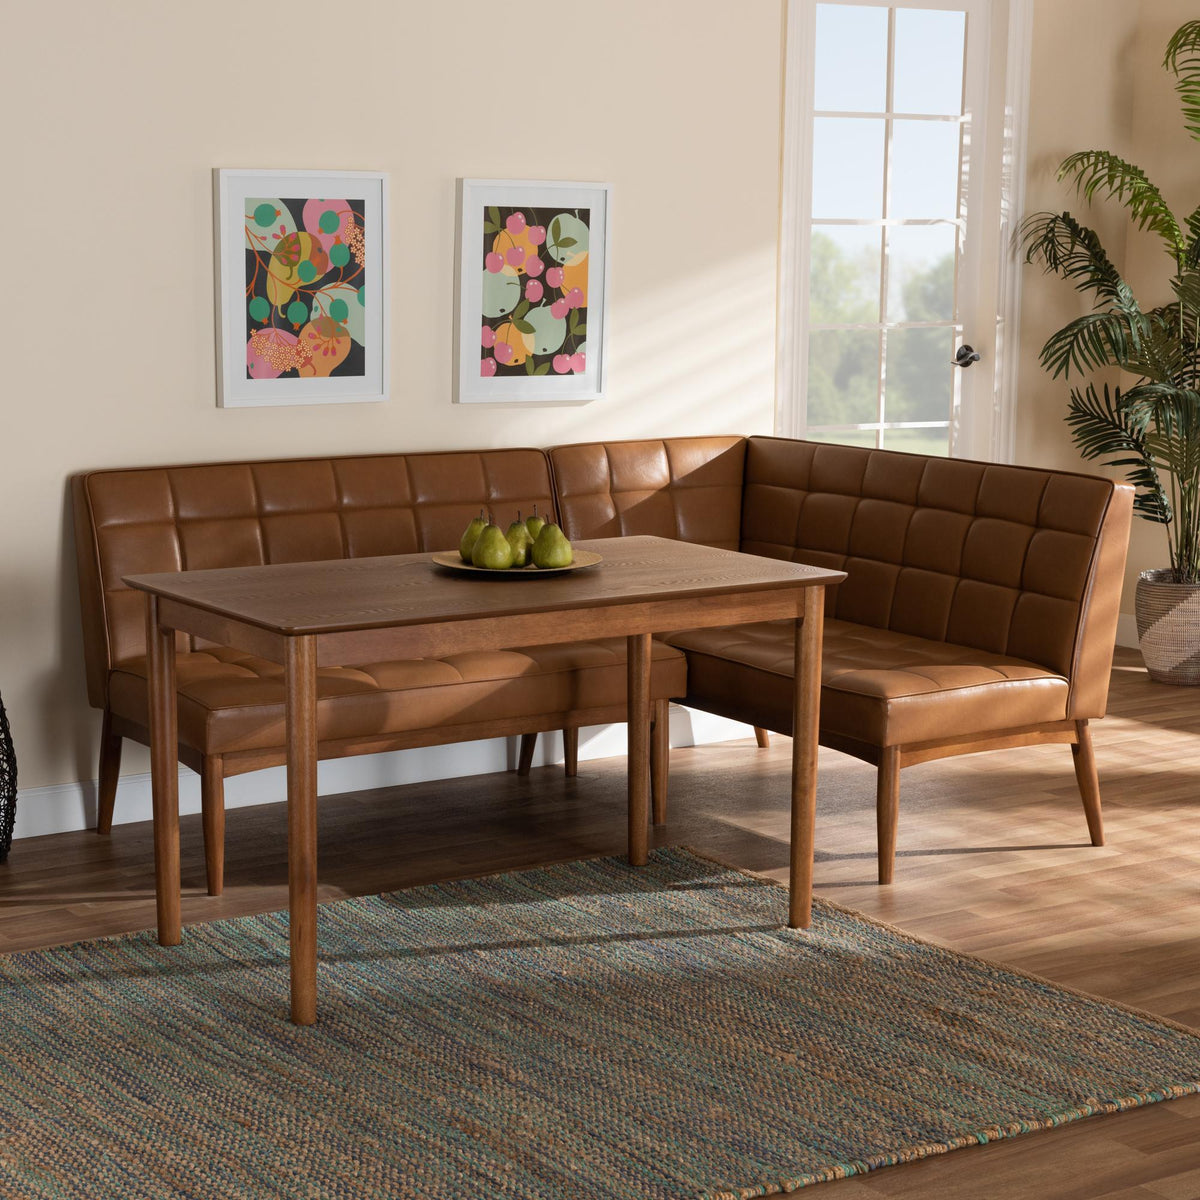 Baxton Studio Sanford Mid-Century Modern Tan Faux Leather Upholstered And Walnut Brown Finished Wood 3-Piece Dining Nook Set - BBT8051.11-Tan/Walnut-3PC Dining Nook Set